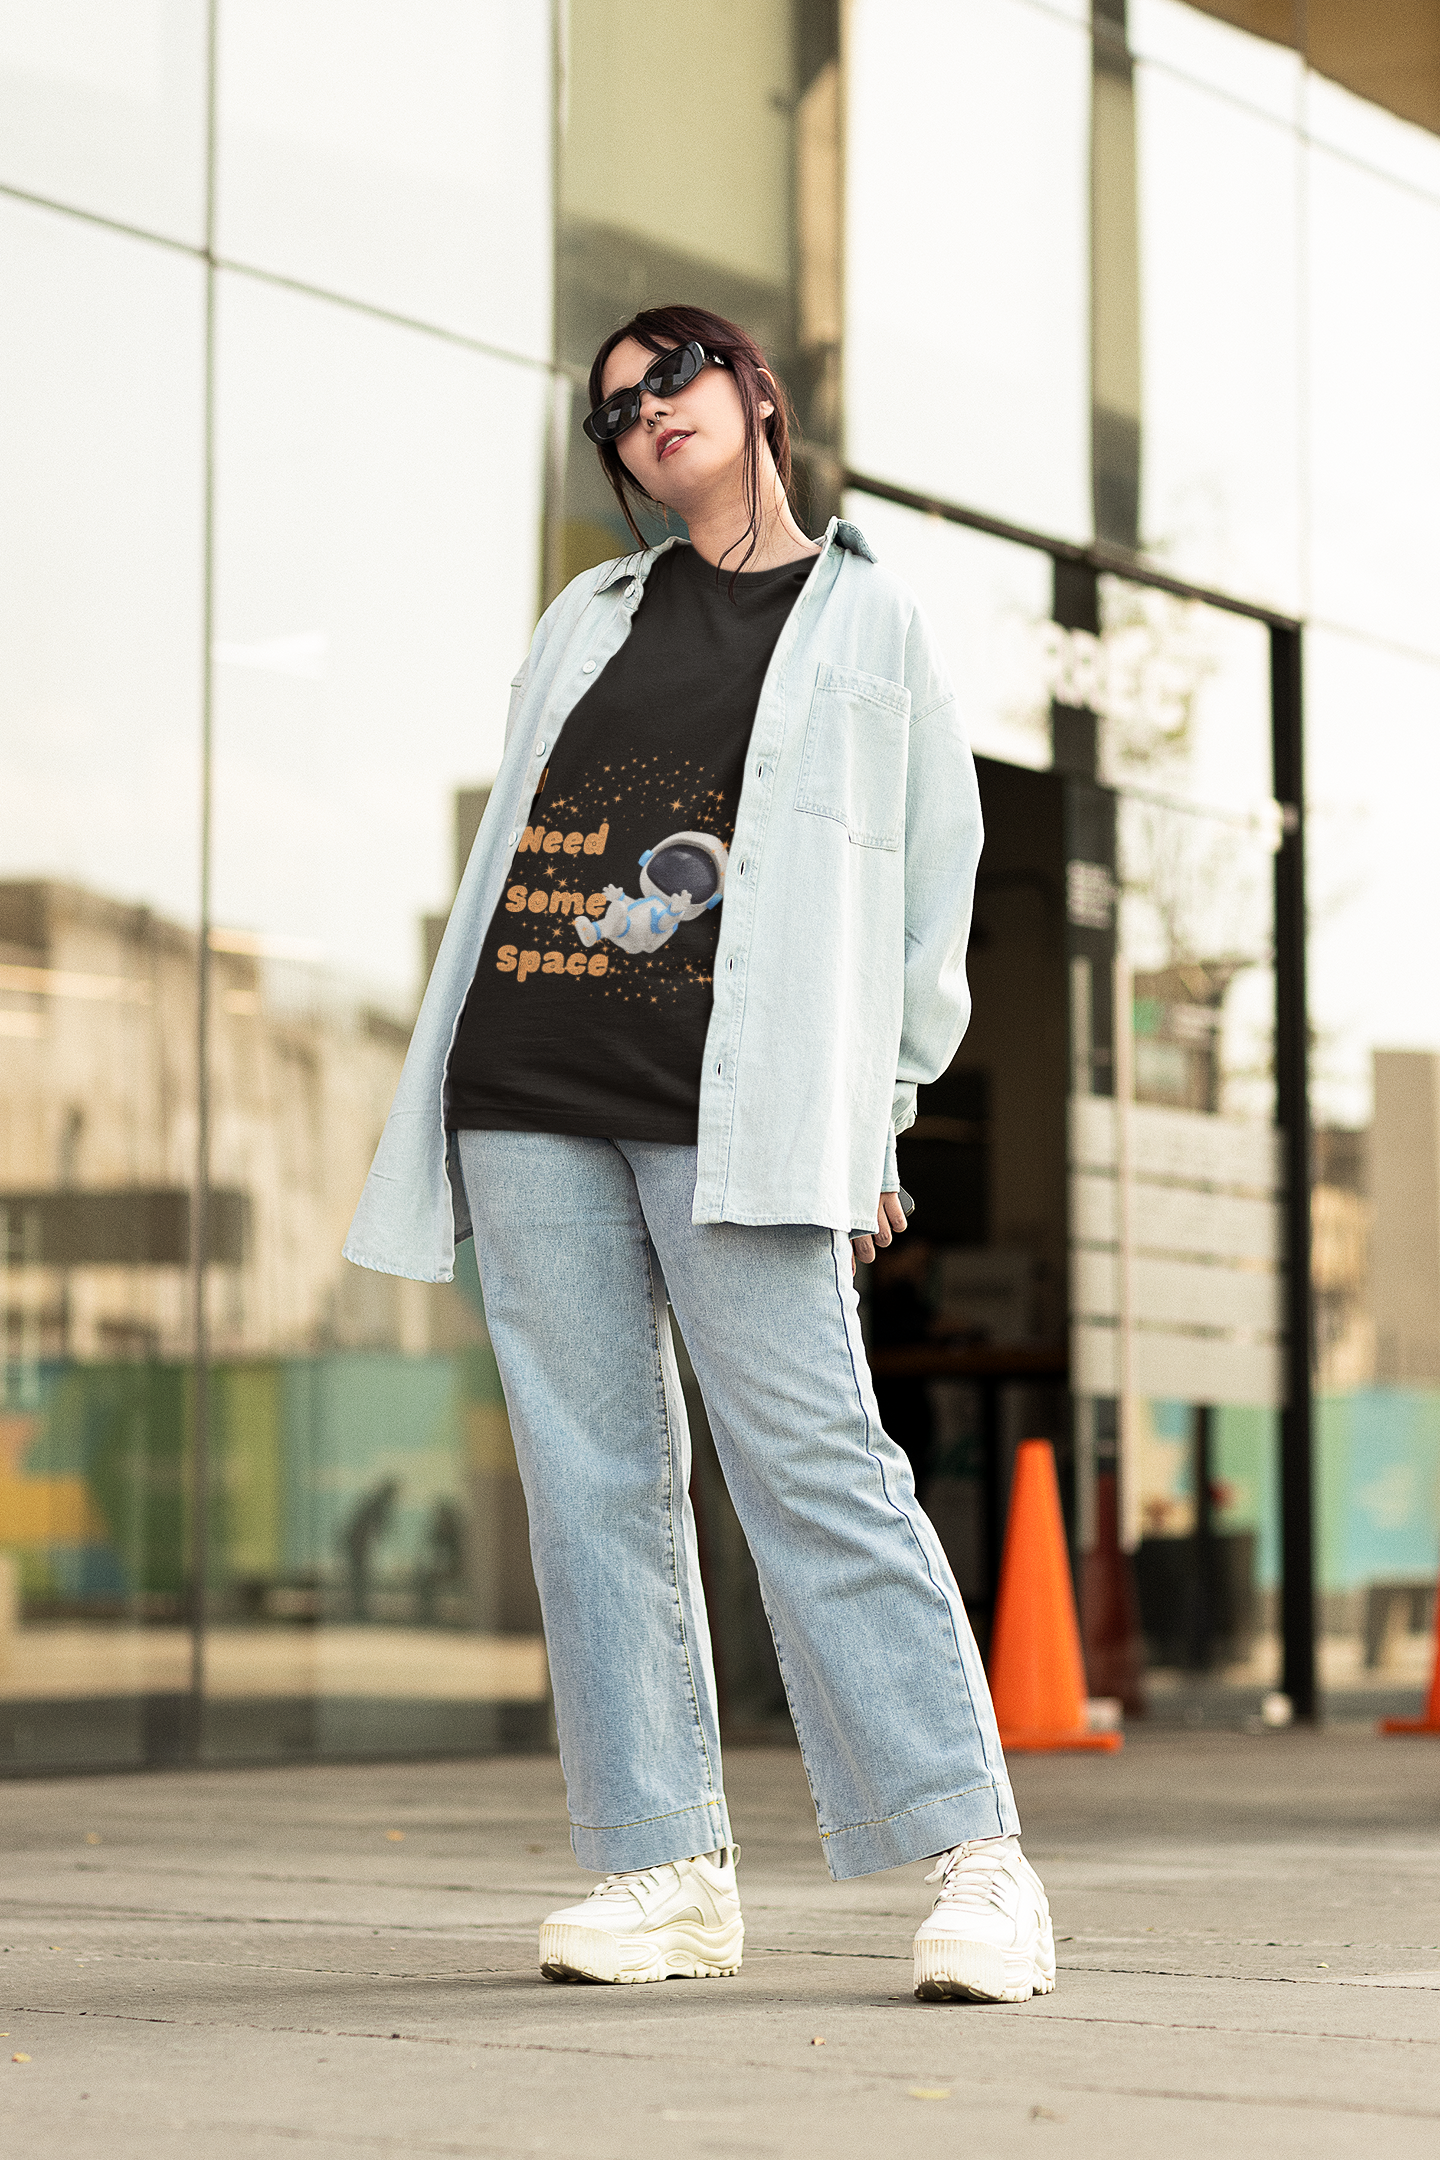 I need Space - Oversized Pregnancy T-shirt